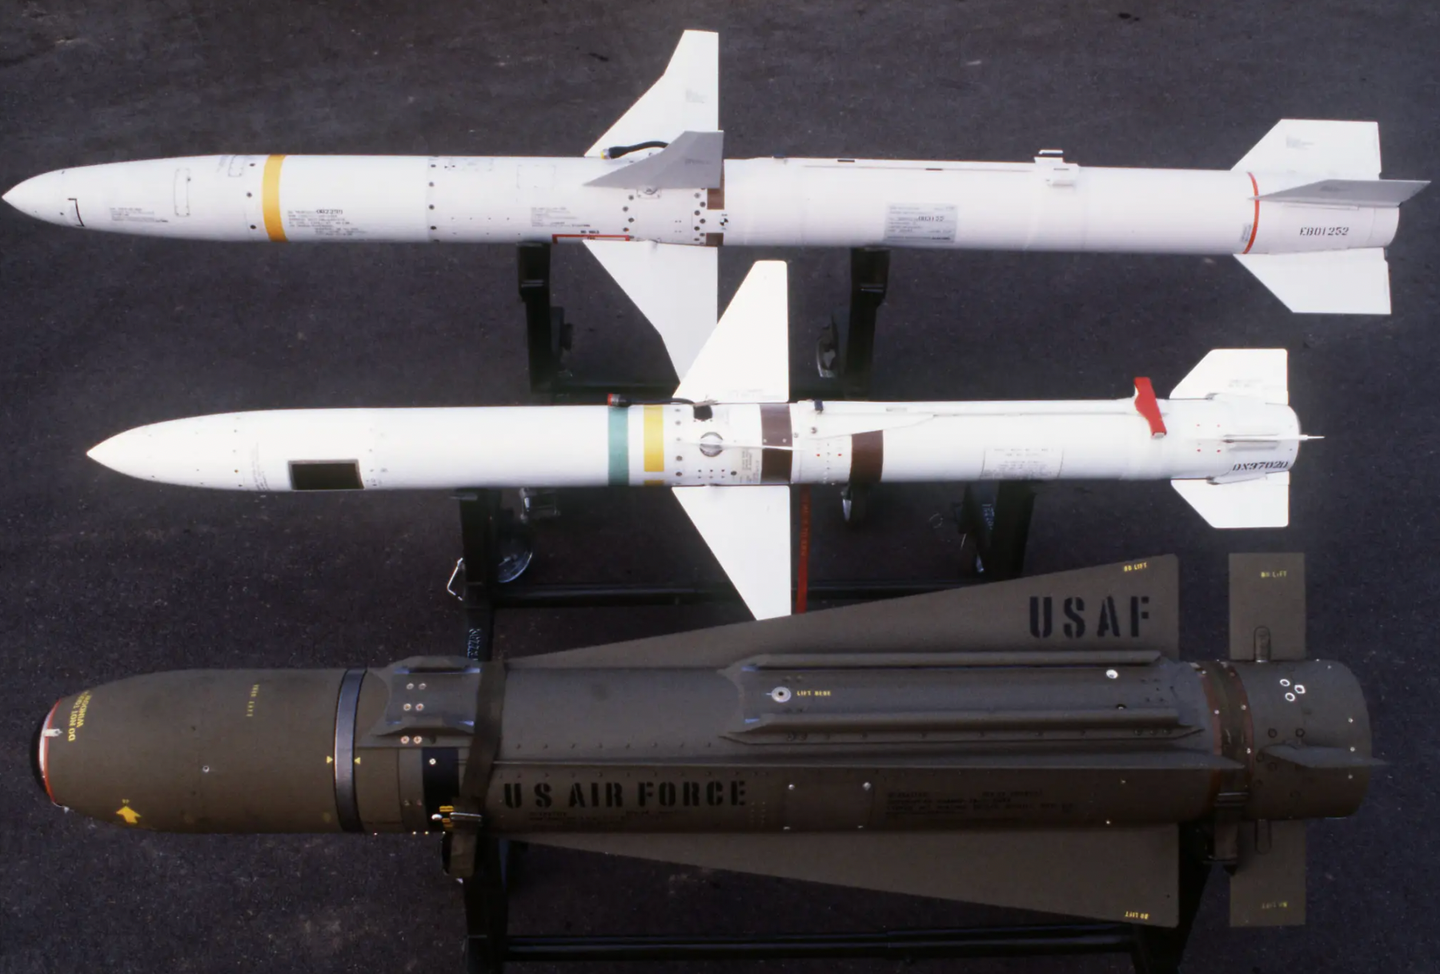 A view of, from top to bottom, an AGM-88 HARM, an AGM-45 Shrike anti-radiation missile, and an AGM-65F Maverick infrared-imaging guided missile. <em>U.S. Air Force</em>